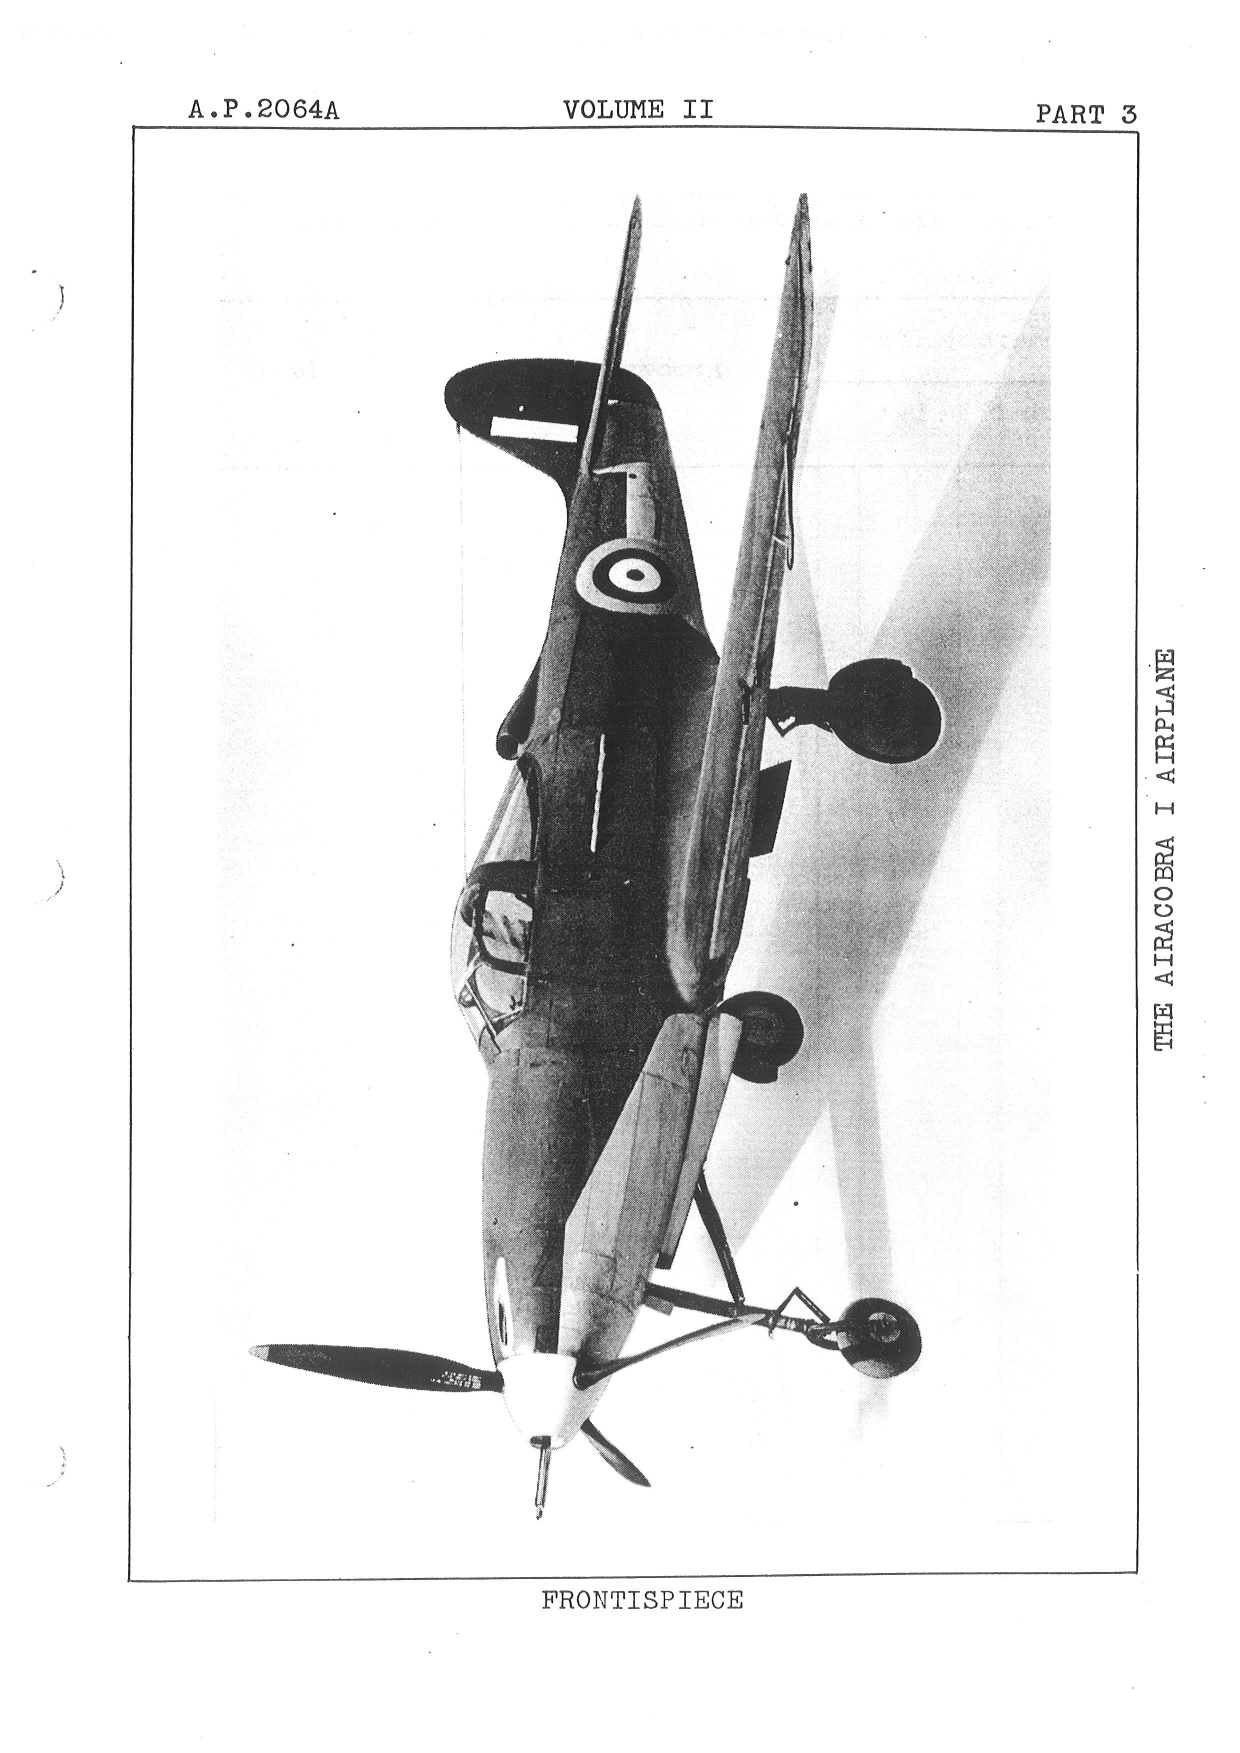 Sample page 3 from AirCorps Library document: Instructions for Repair of Airacobra I Airplane